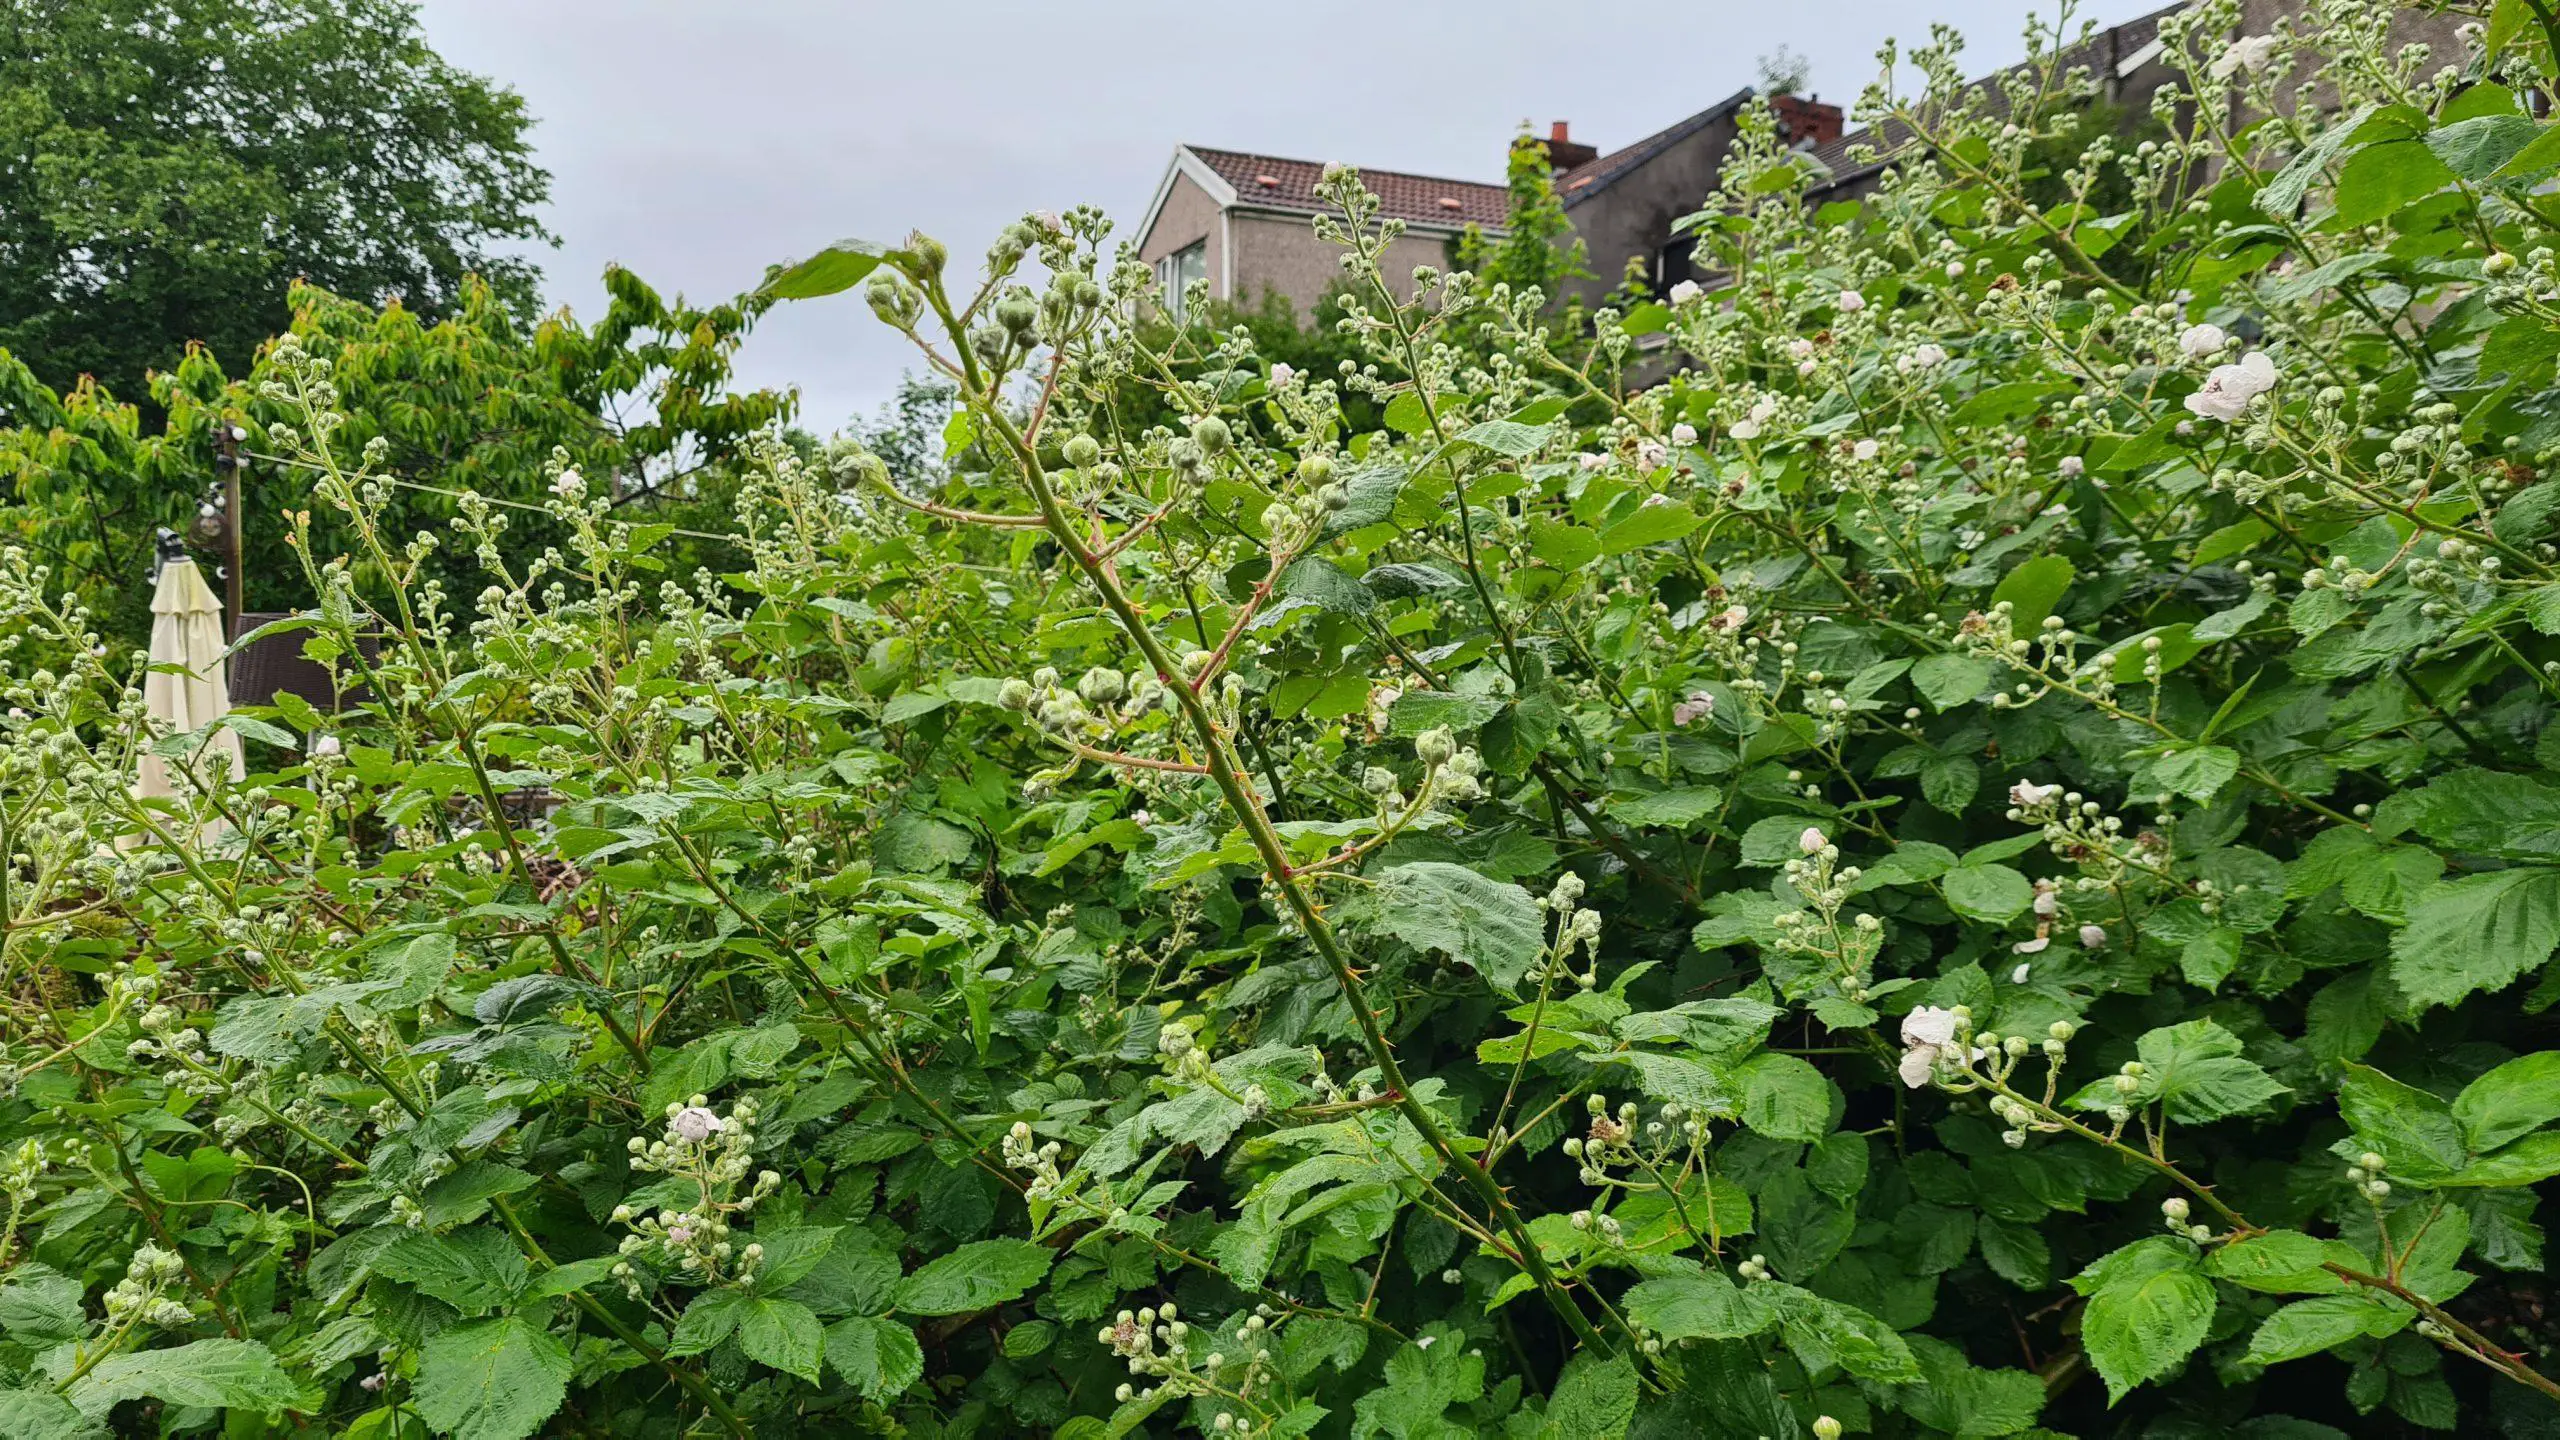 Large infestation of brambles in a garden at the height of Summer